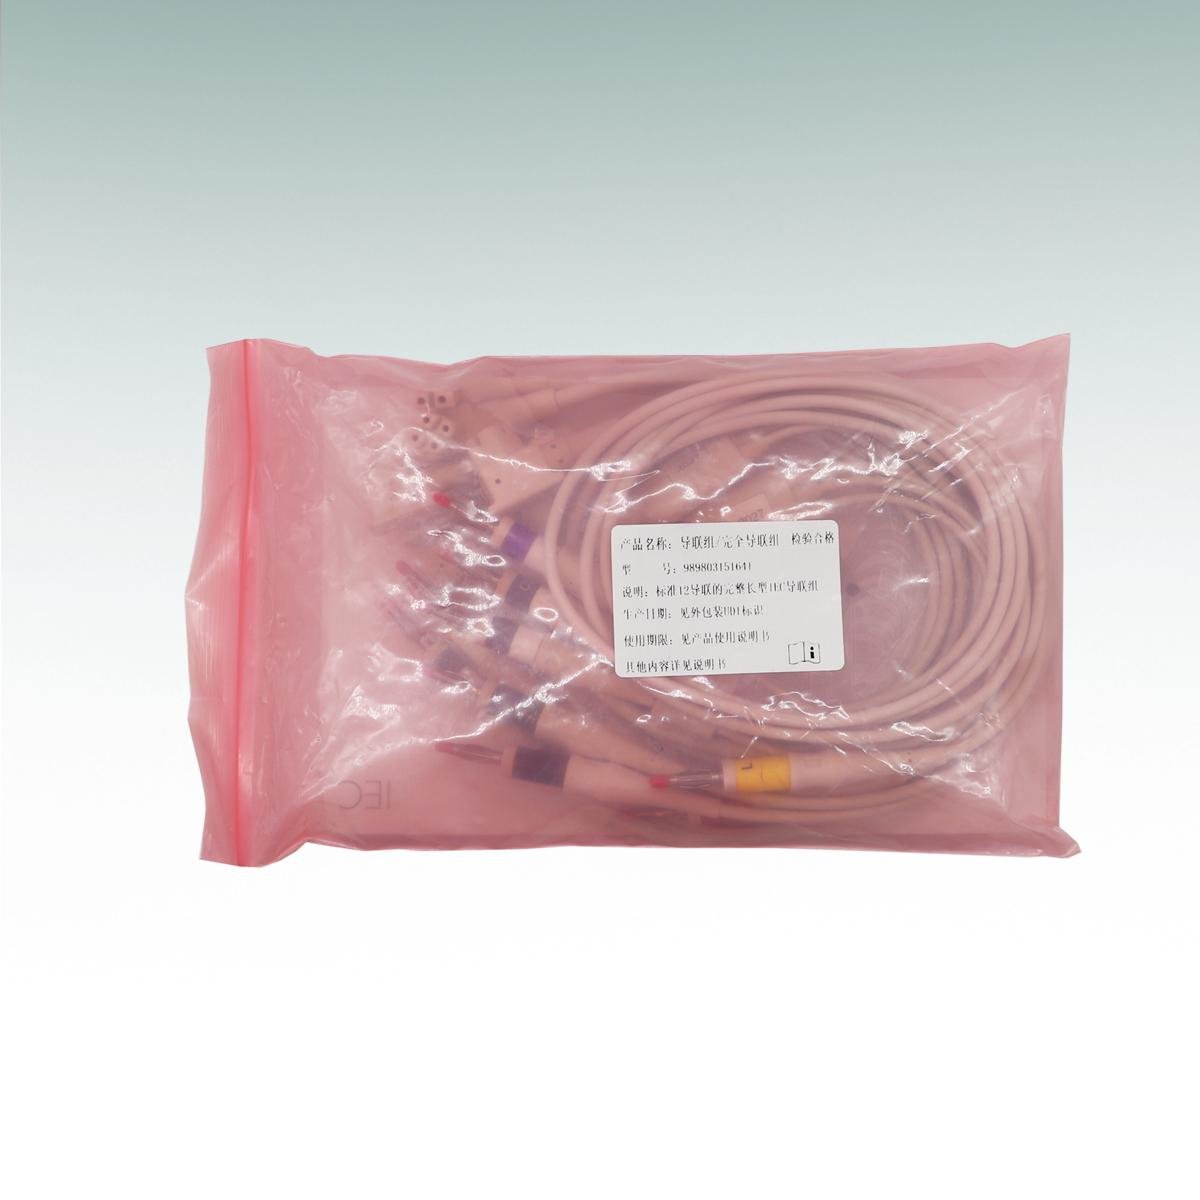 Original Philips ecg cables and leadwires REF 989803151641 for ECG EKG 4